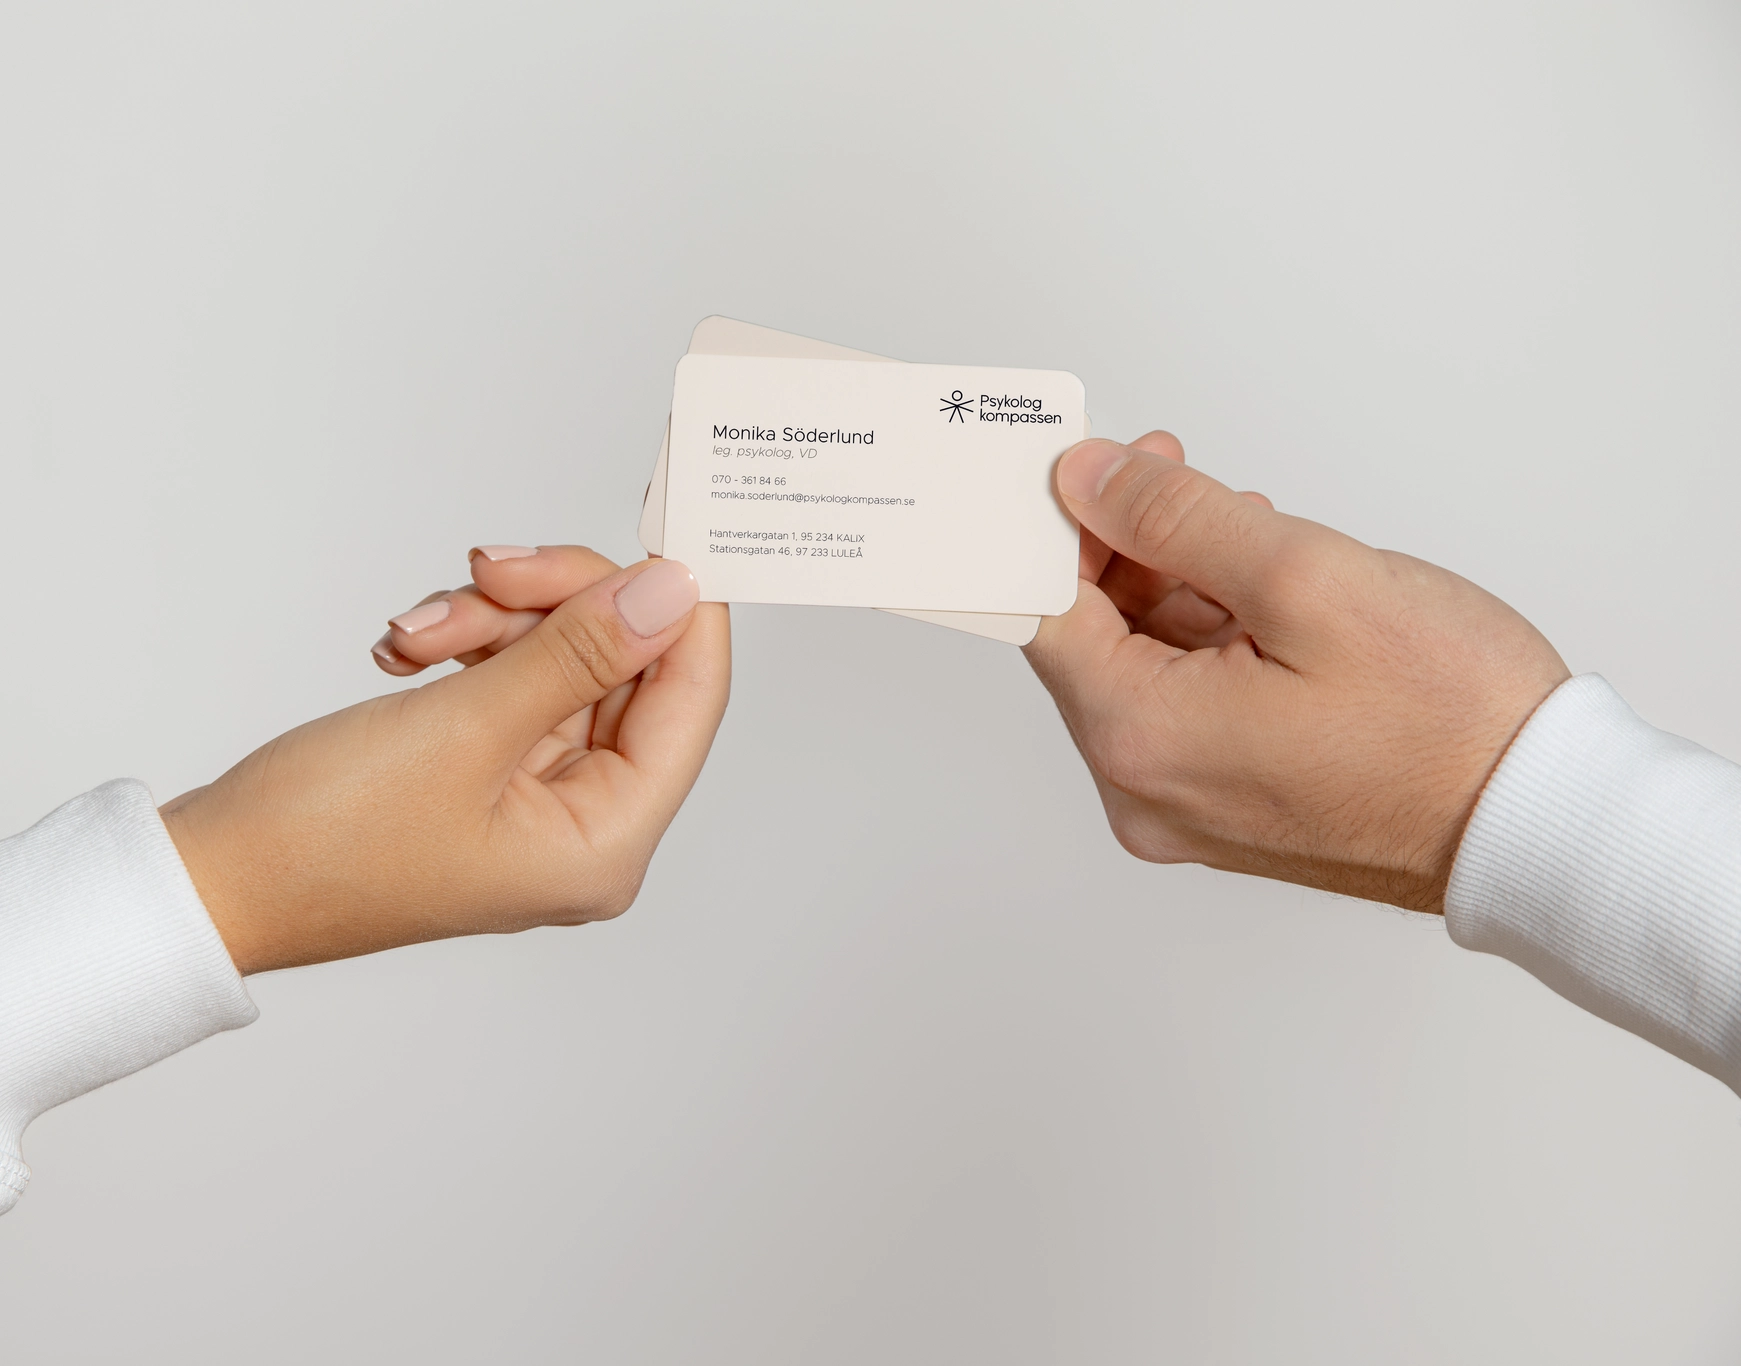 a close up of two hands passing each other business card with details of the owner of Psykologkompassen